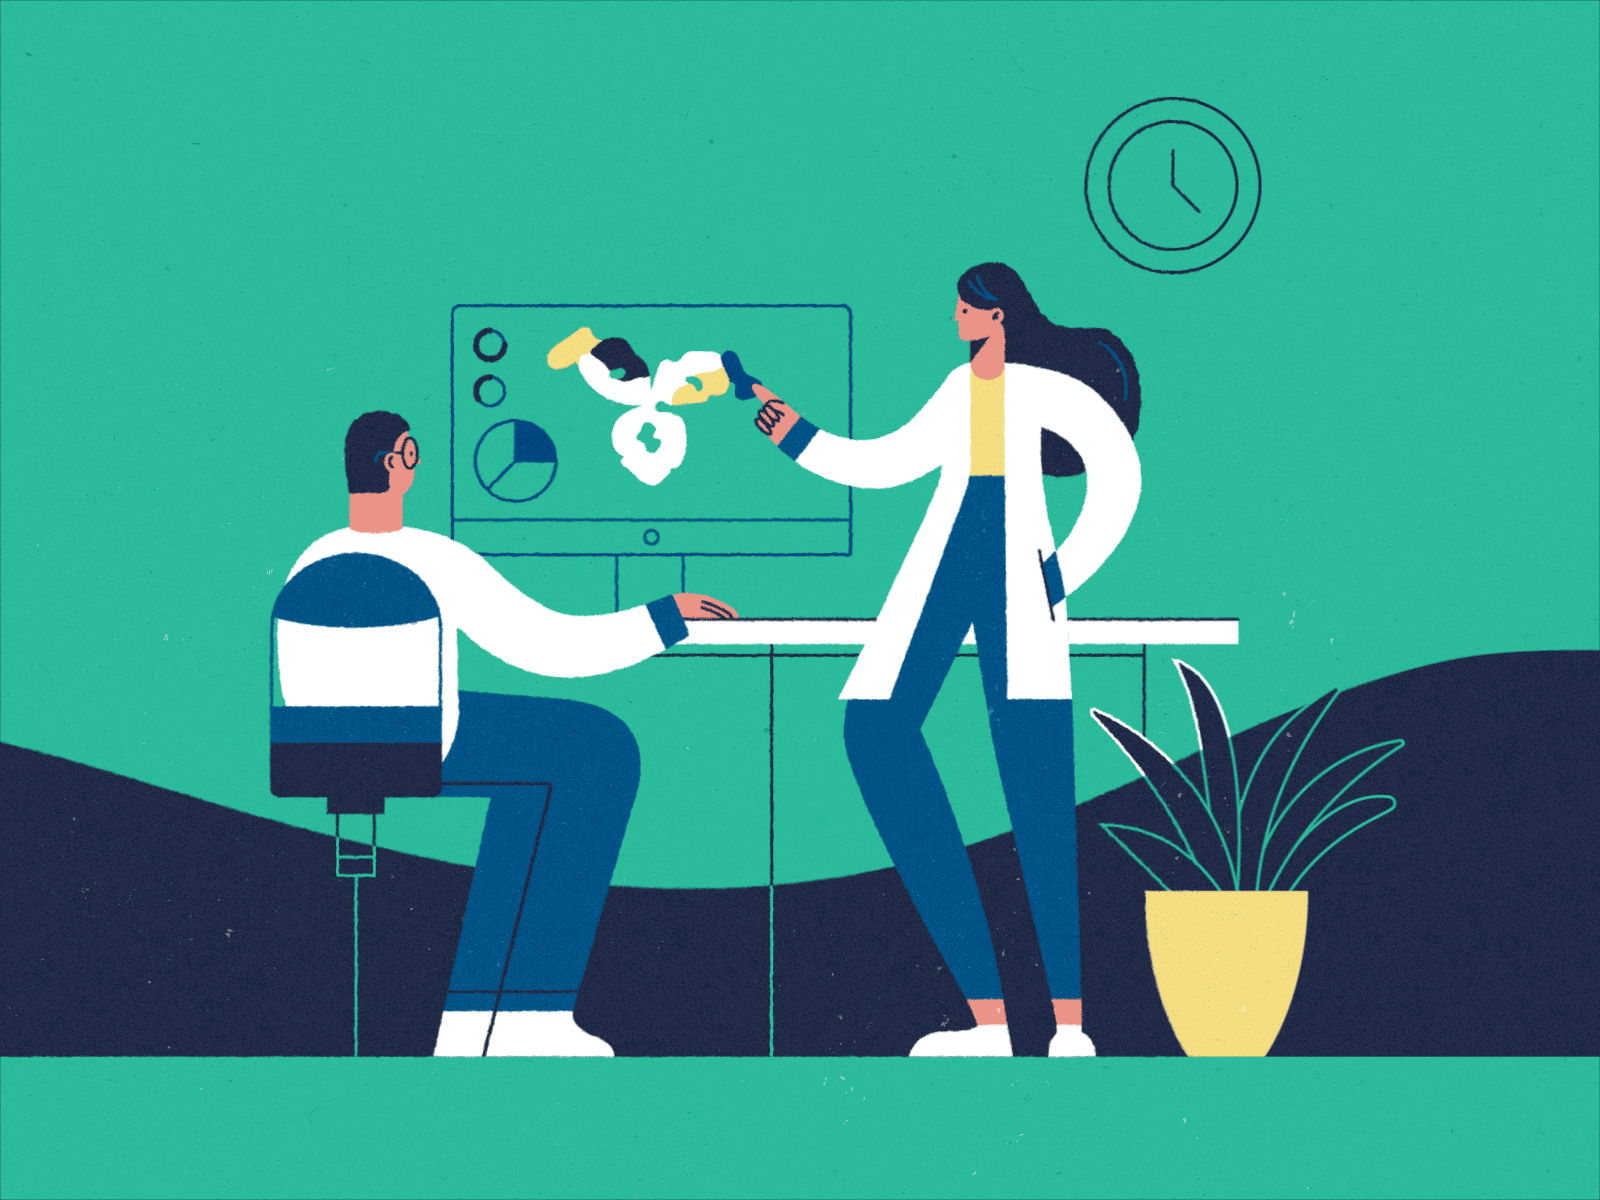 Working in laboratory by Daria on Dribbble